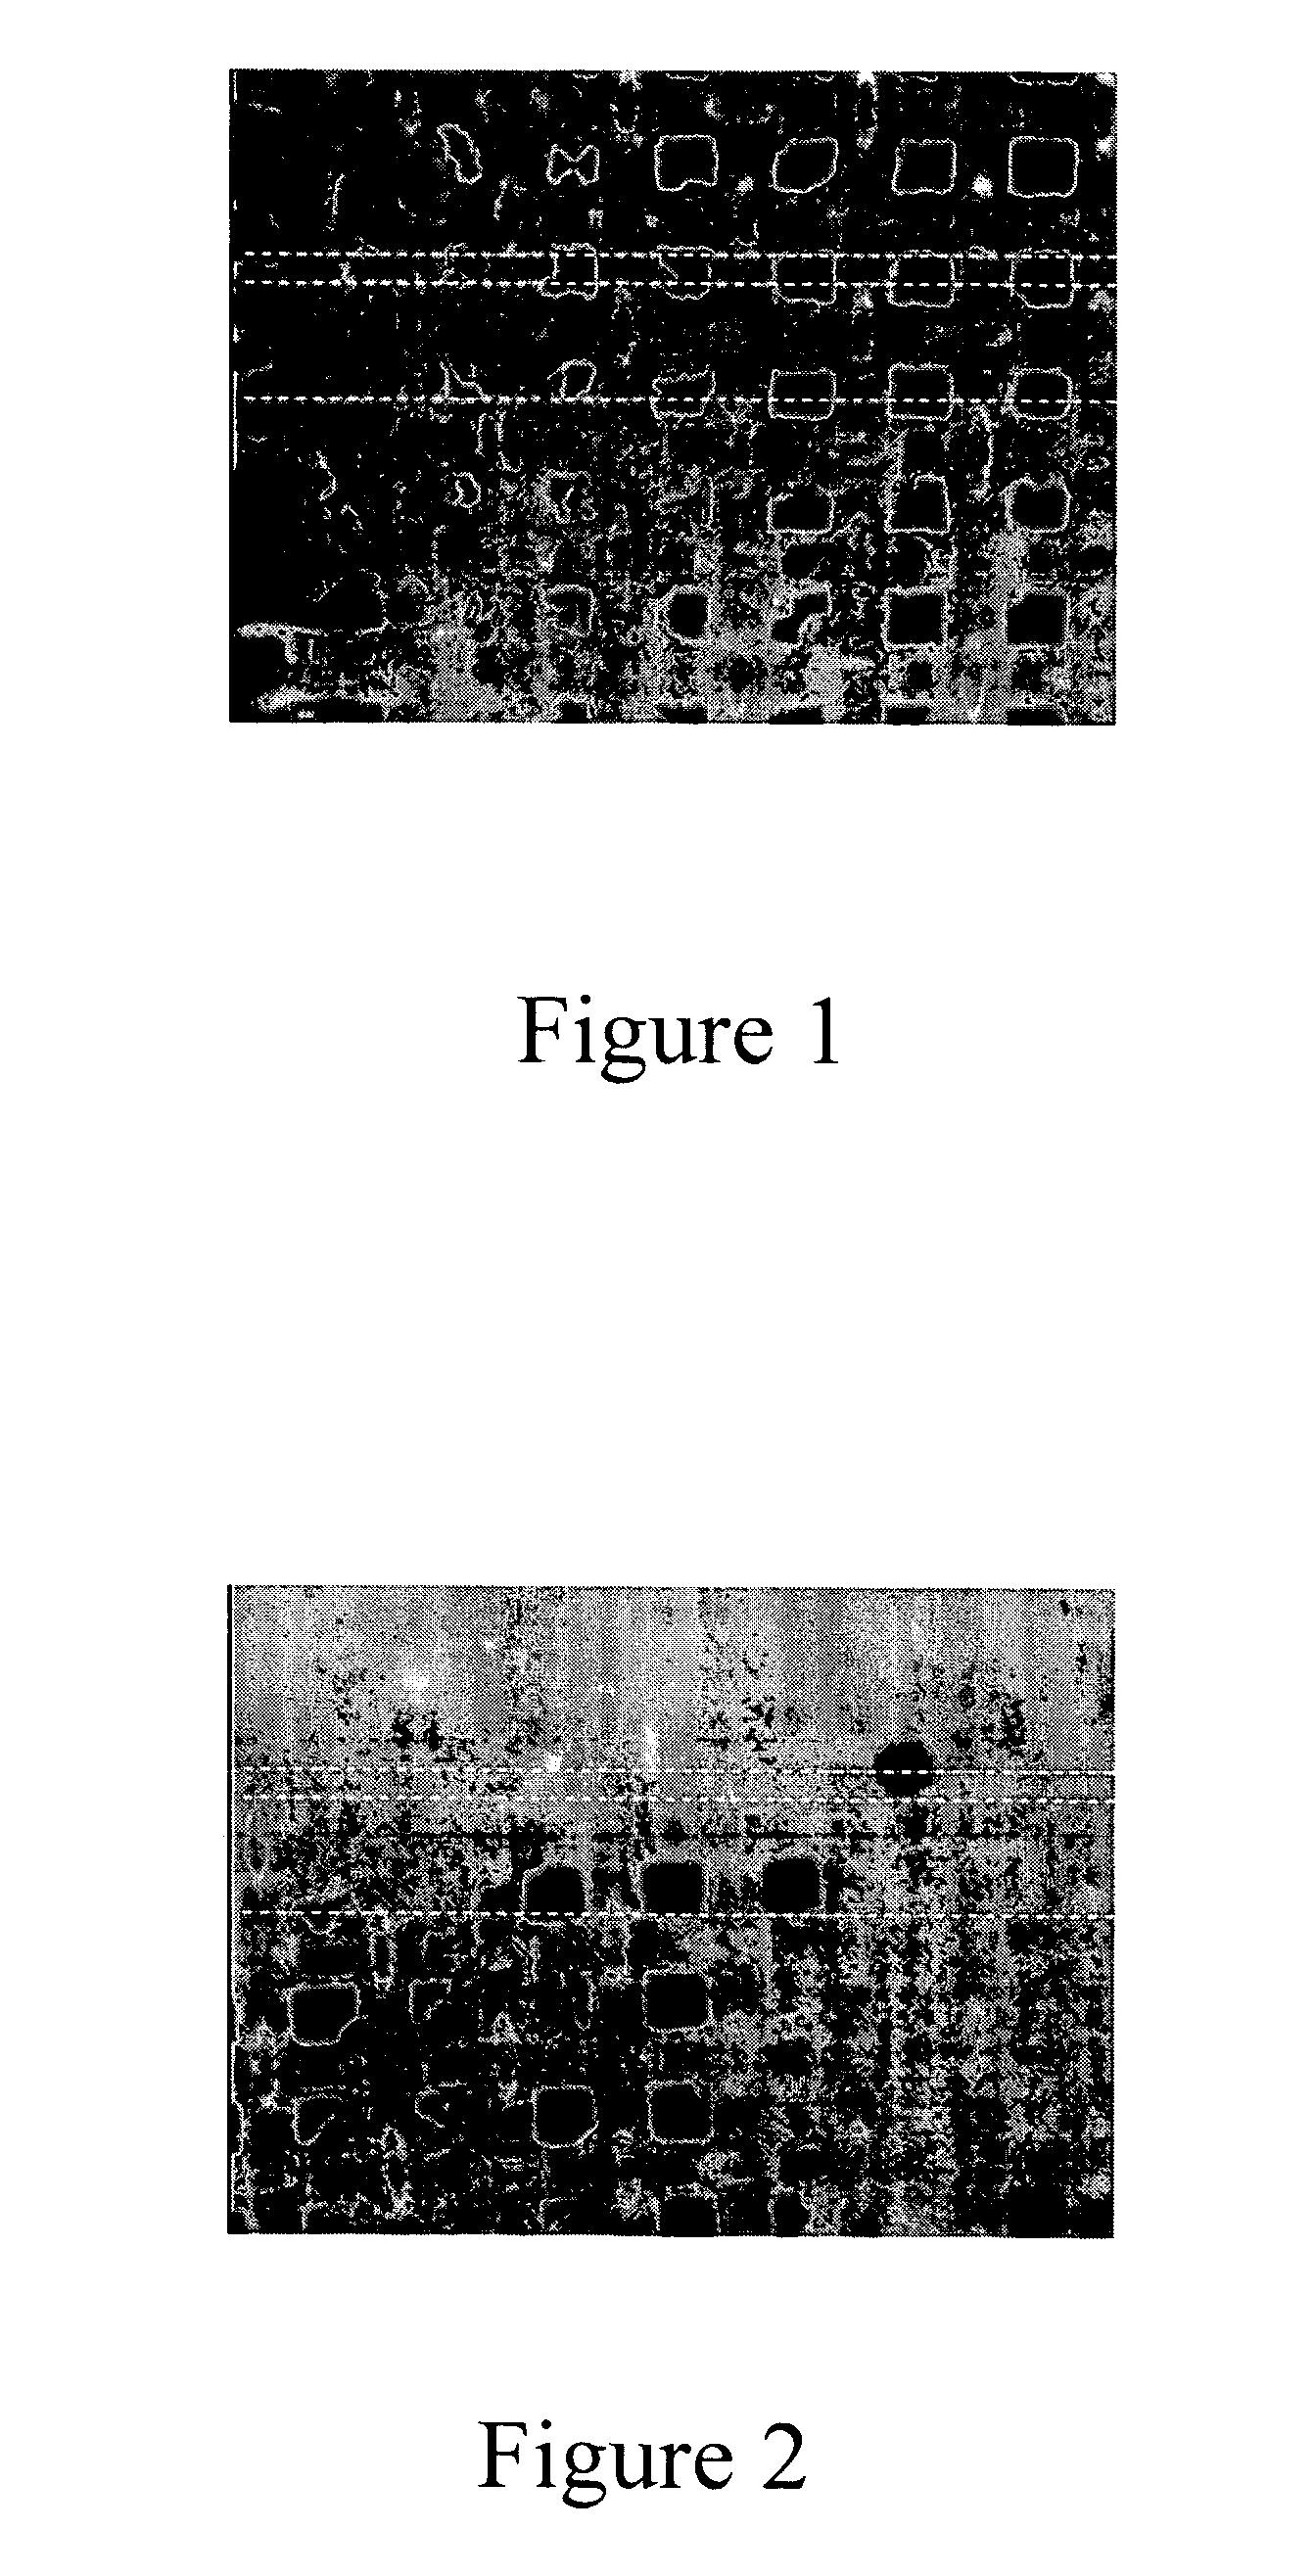 Transdermal delivery system for dried particulate or lyophilized peptides and polypeptides